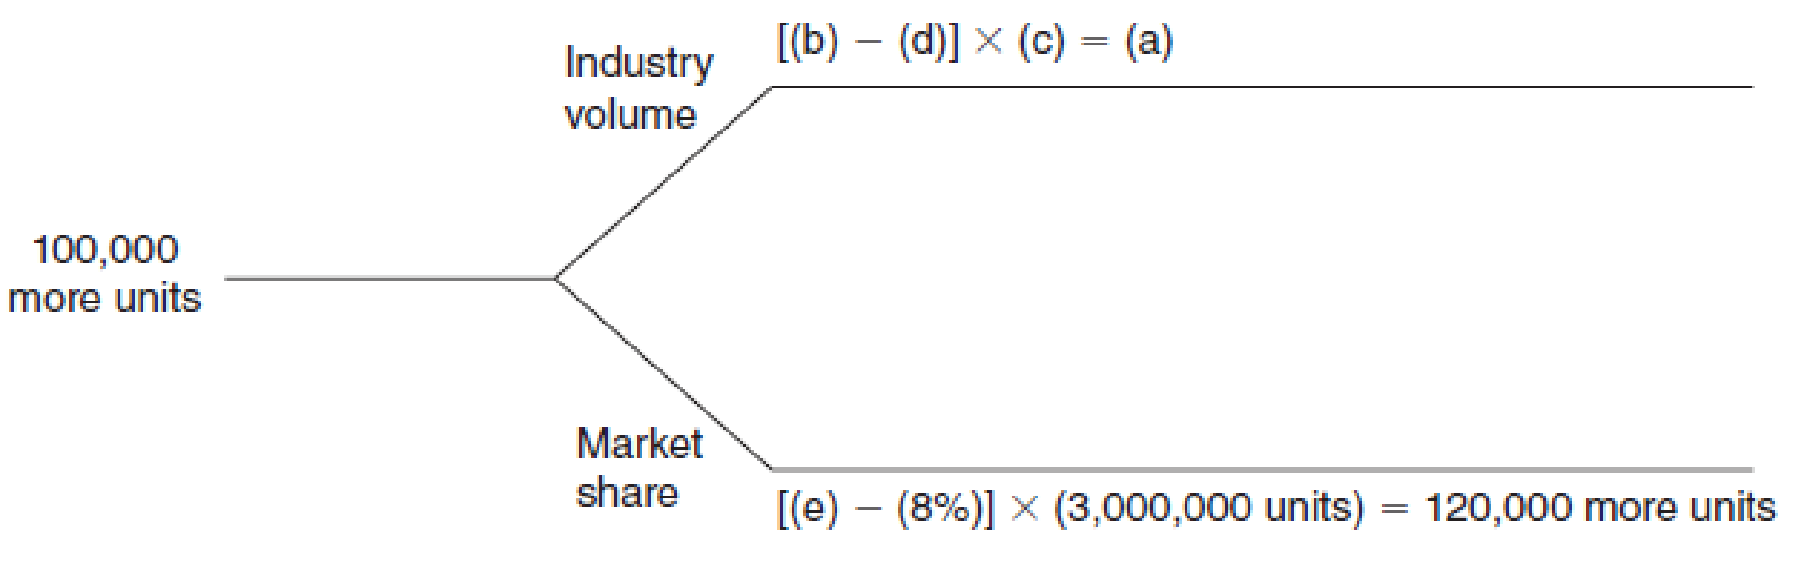 Chapter 17, Problem 43P, Industry Volume and Market Share: Missing Data The following graph is similar to that in Exhibit 